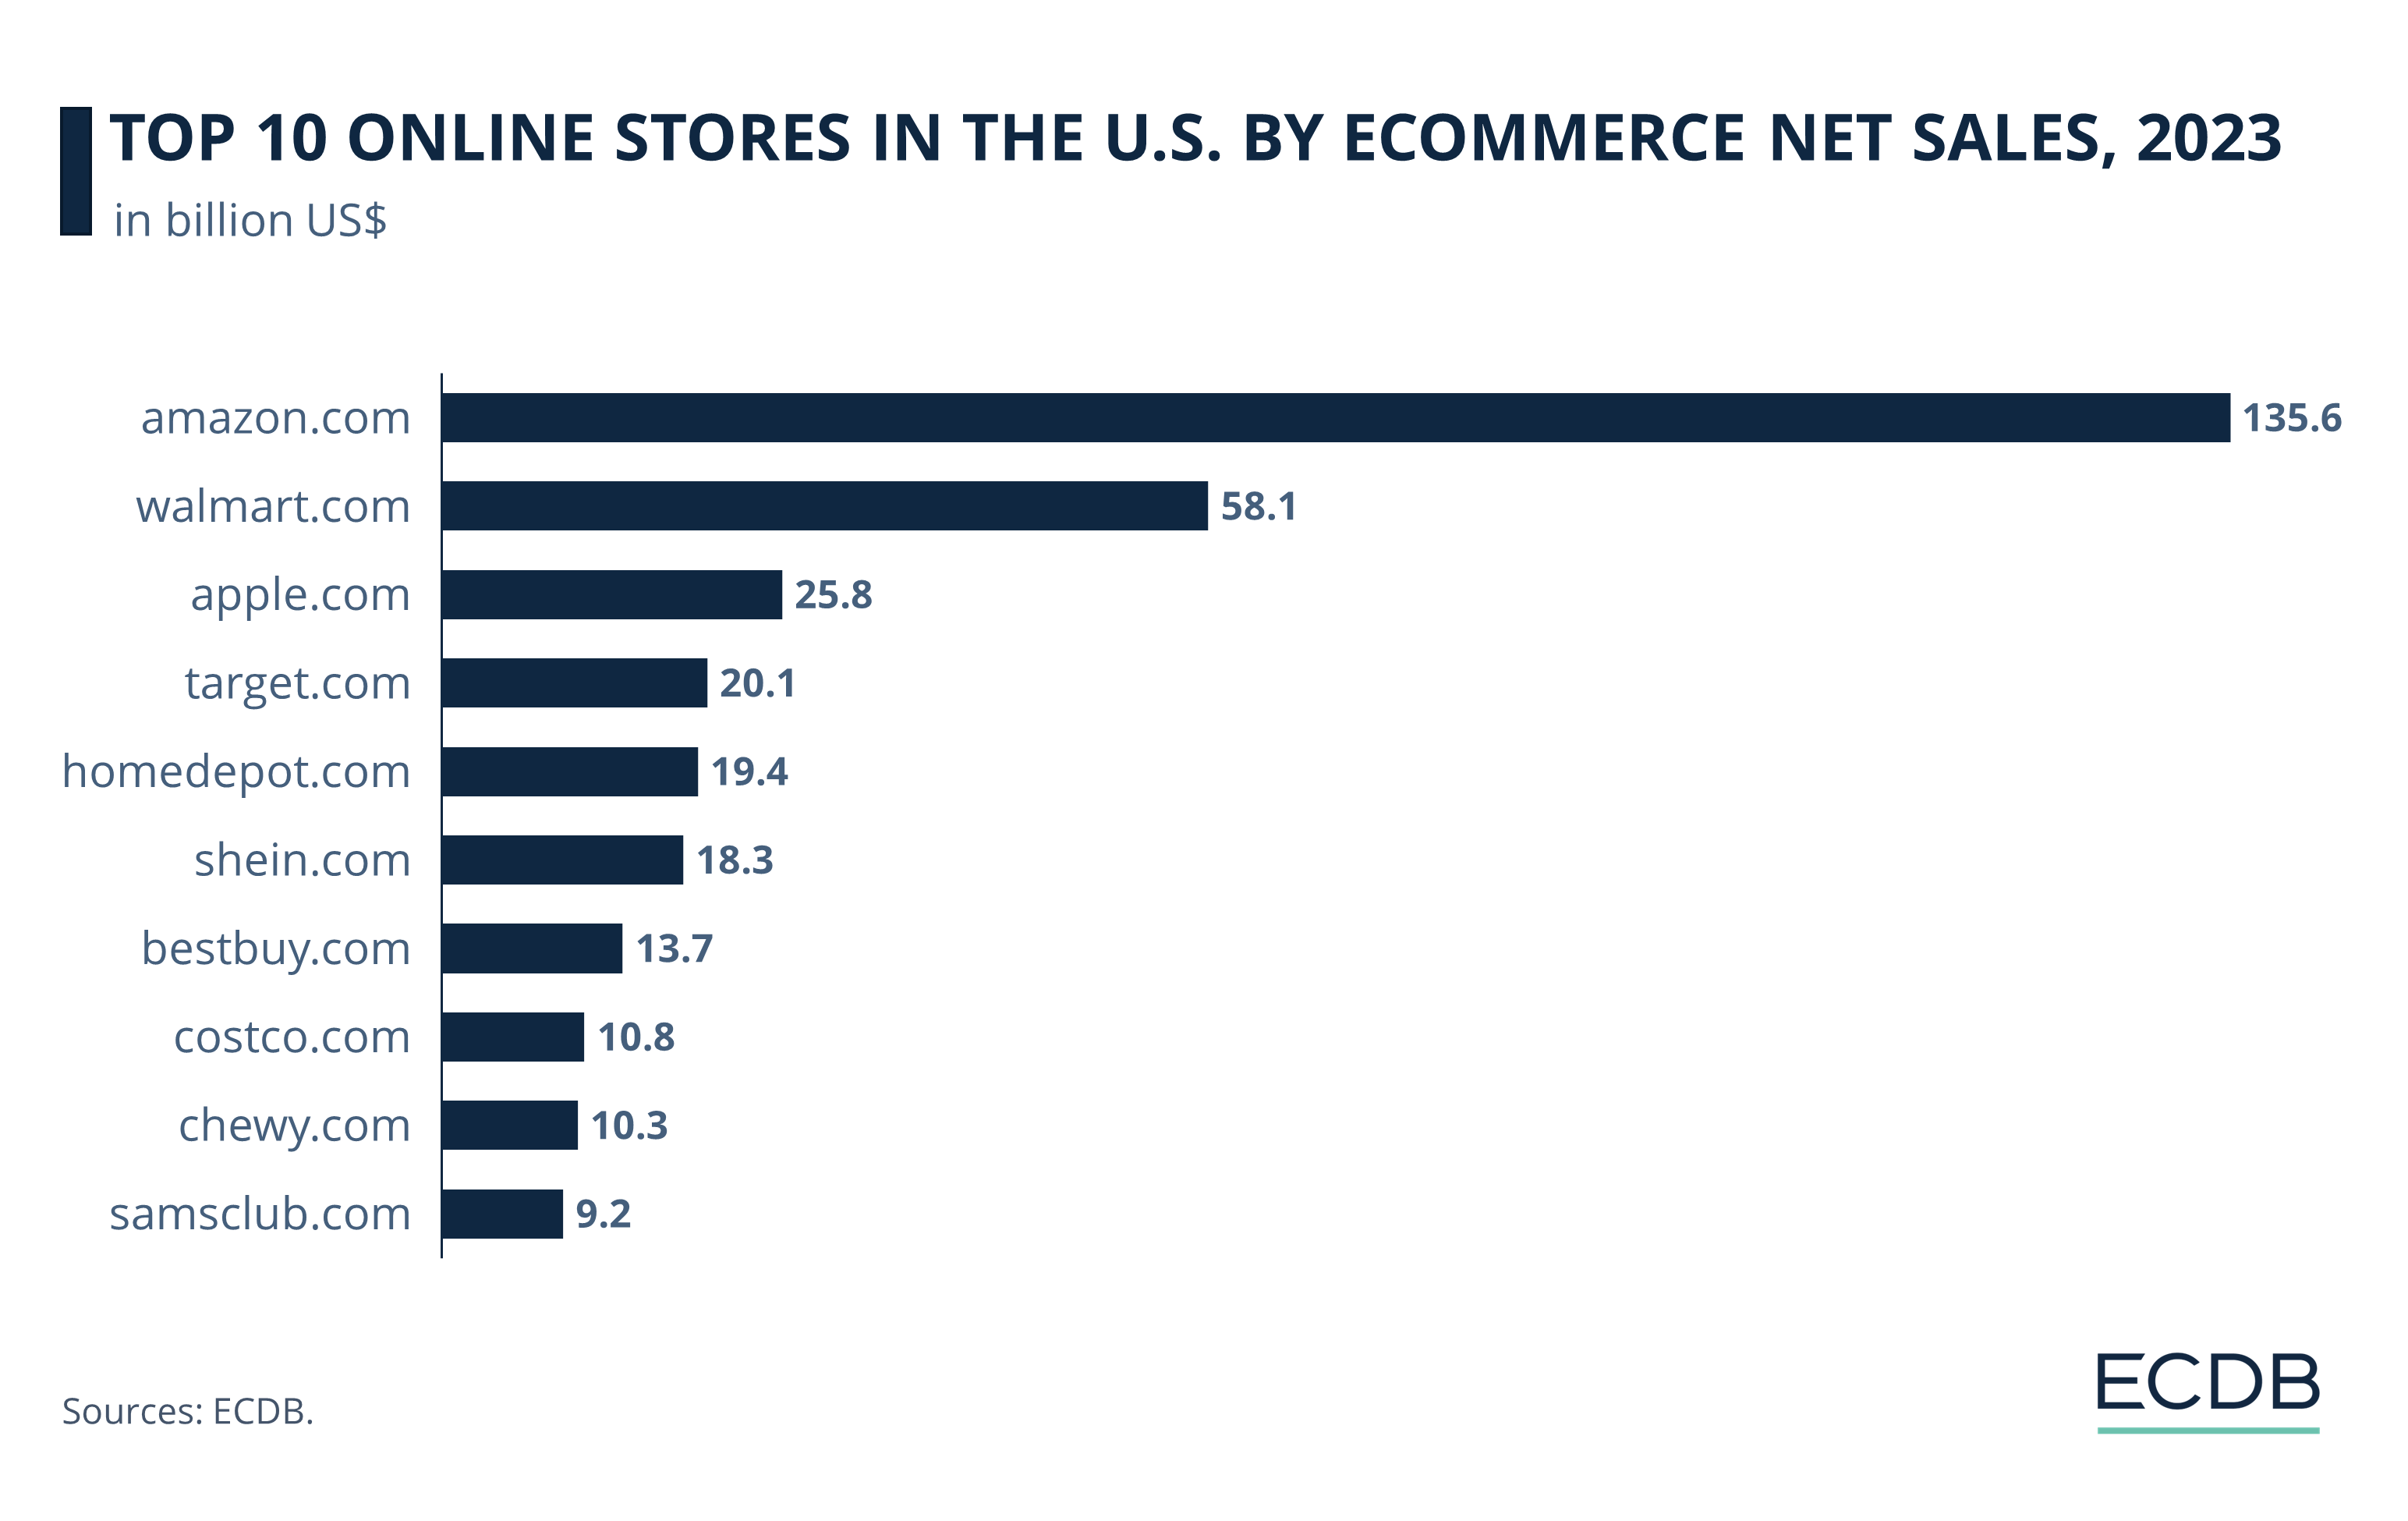 Top 10 Online Stores in the U.S. by eCommerce Net Sales, 2023